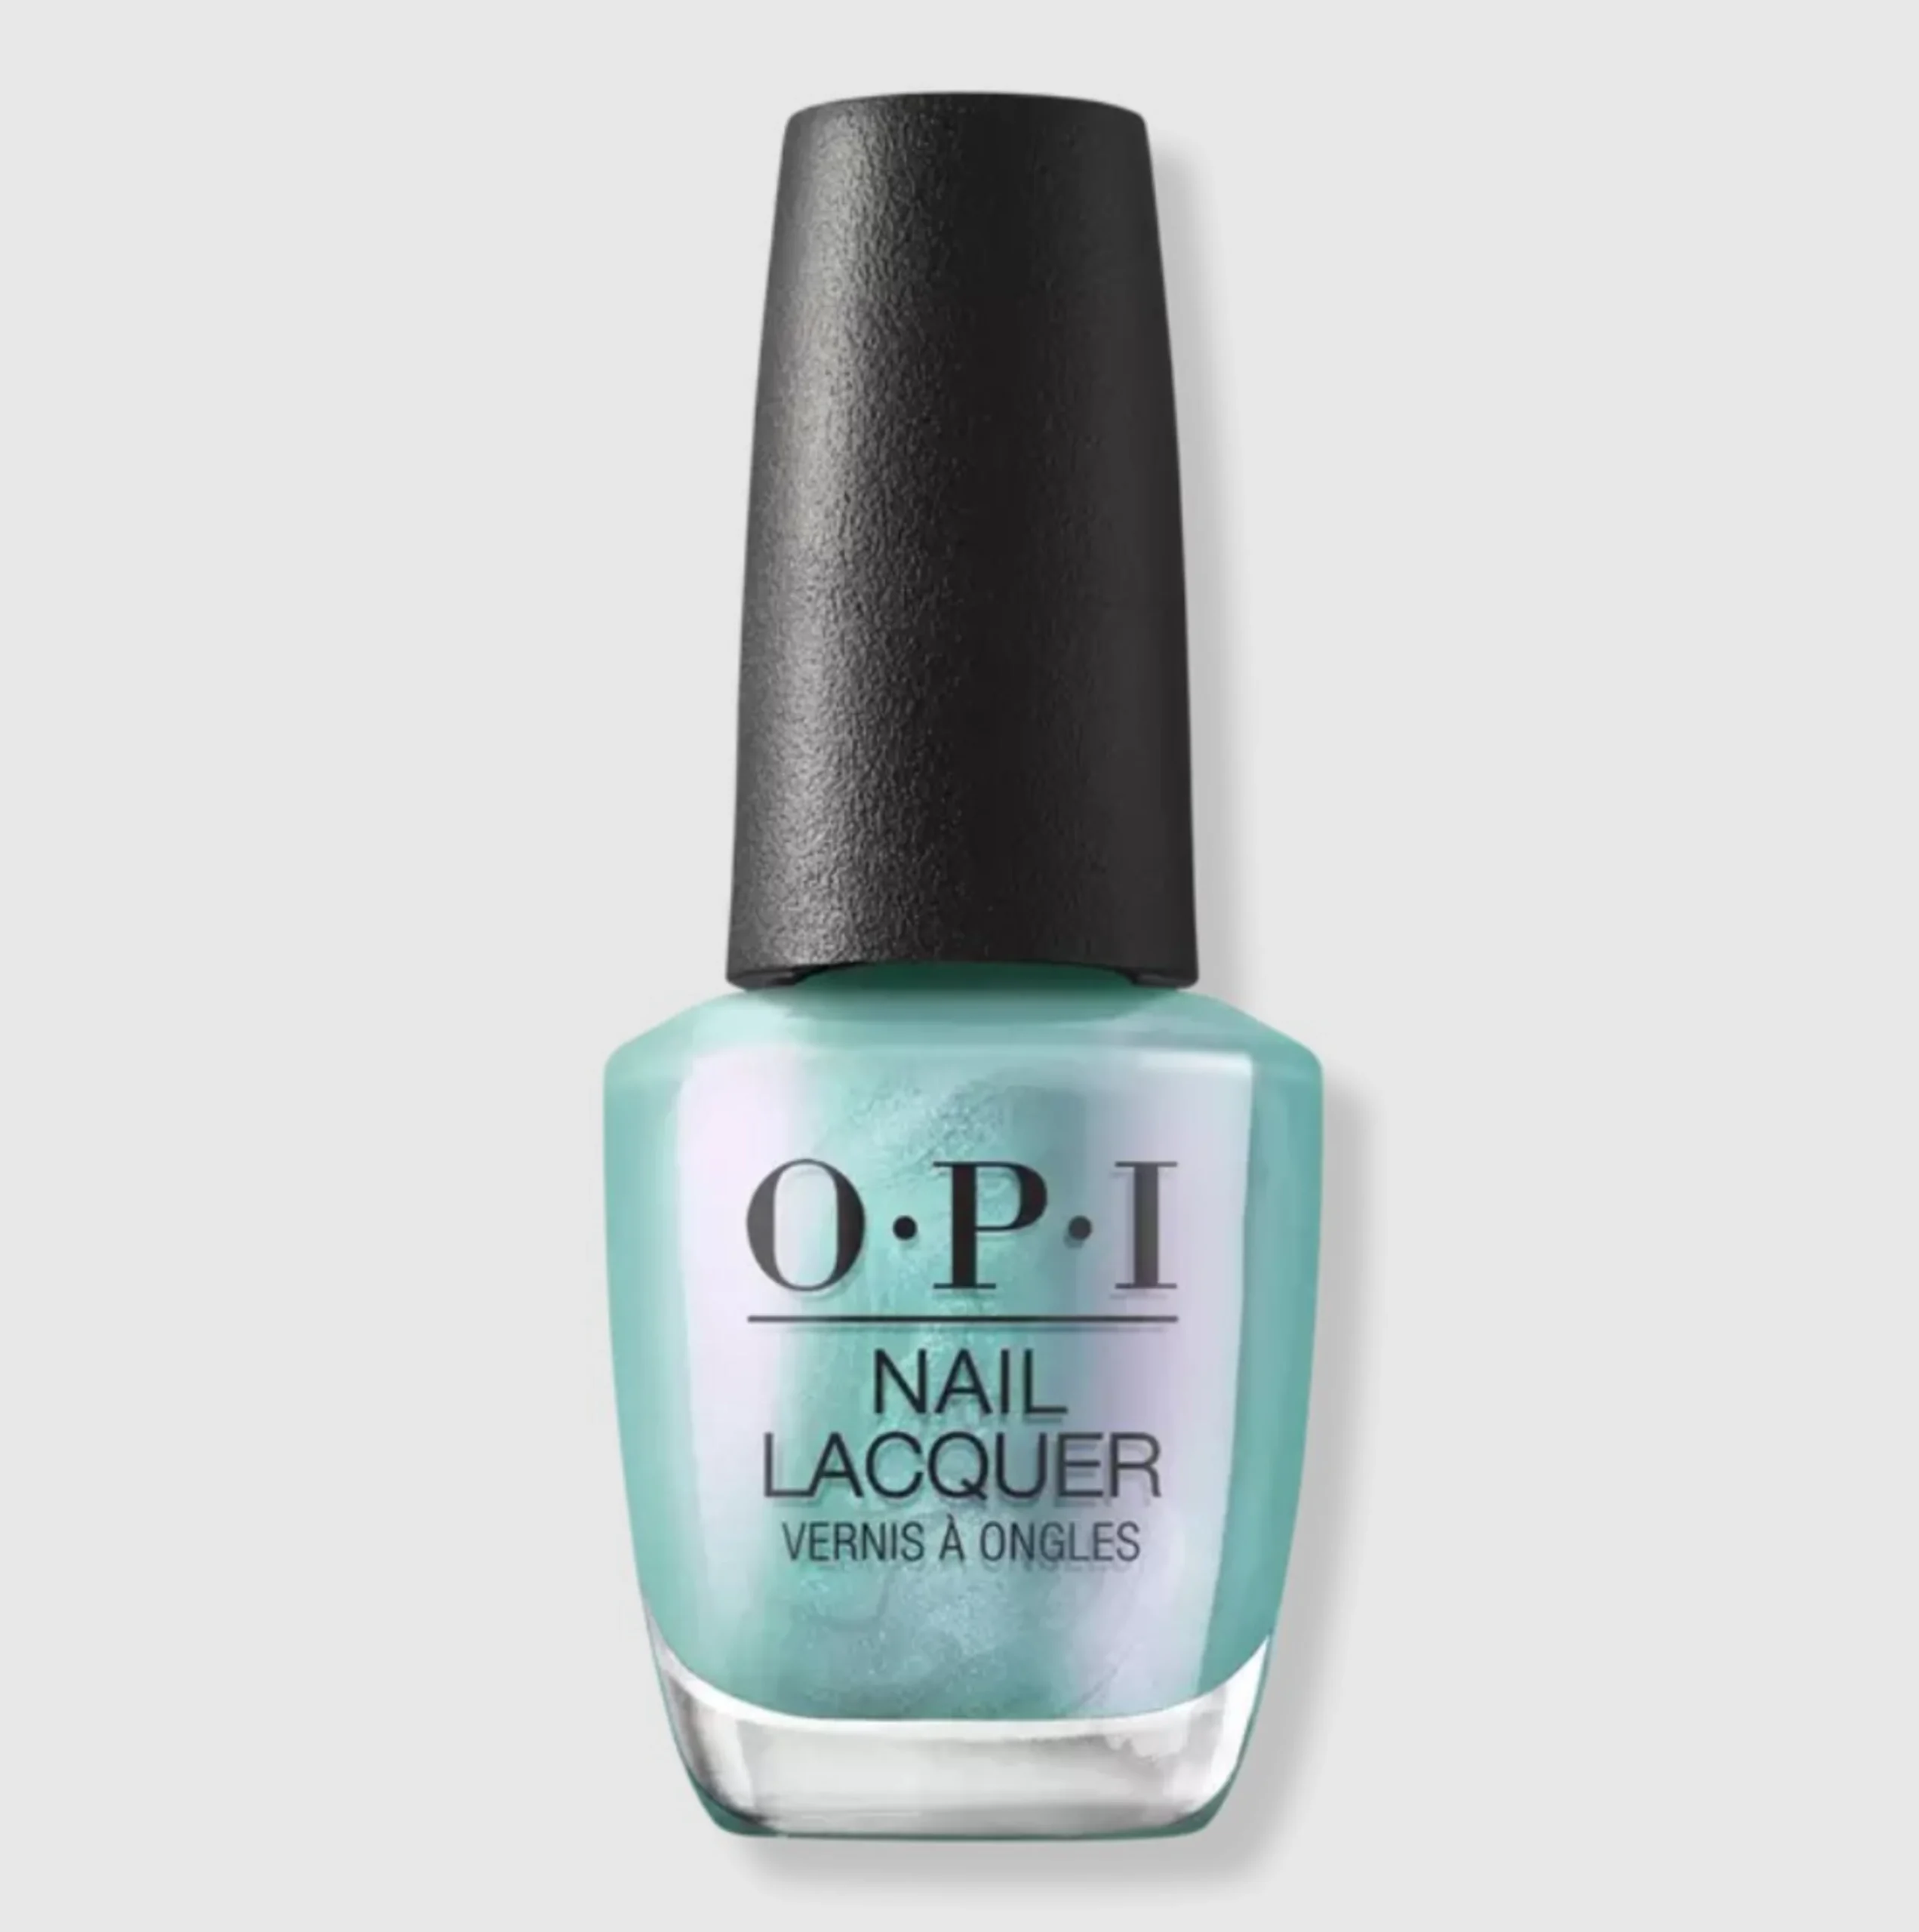 OPI Nail Lacquer in Pisces the Future